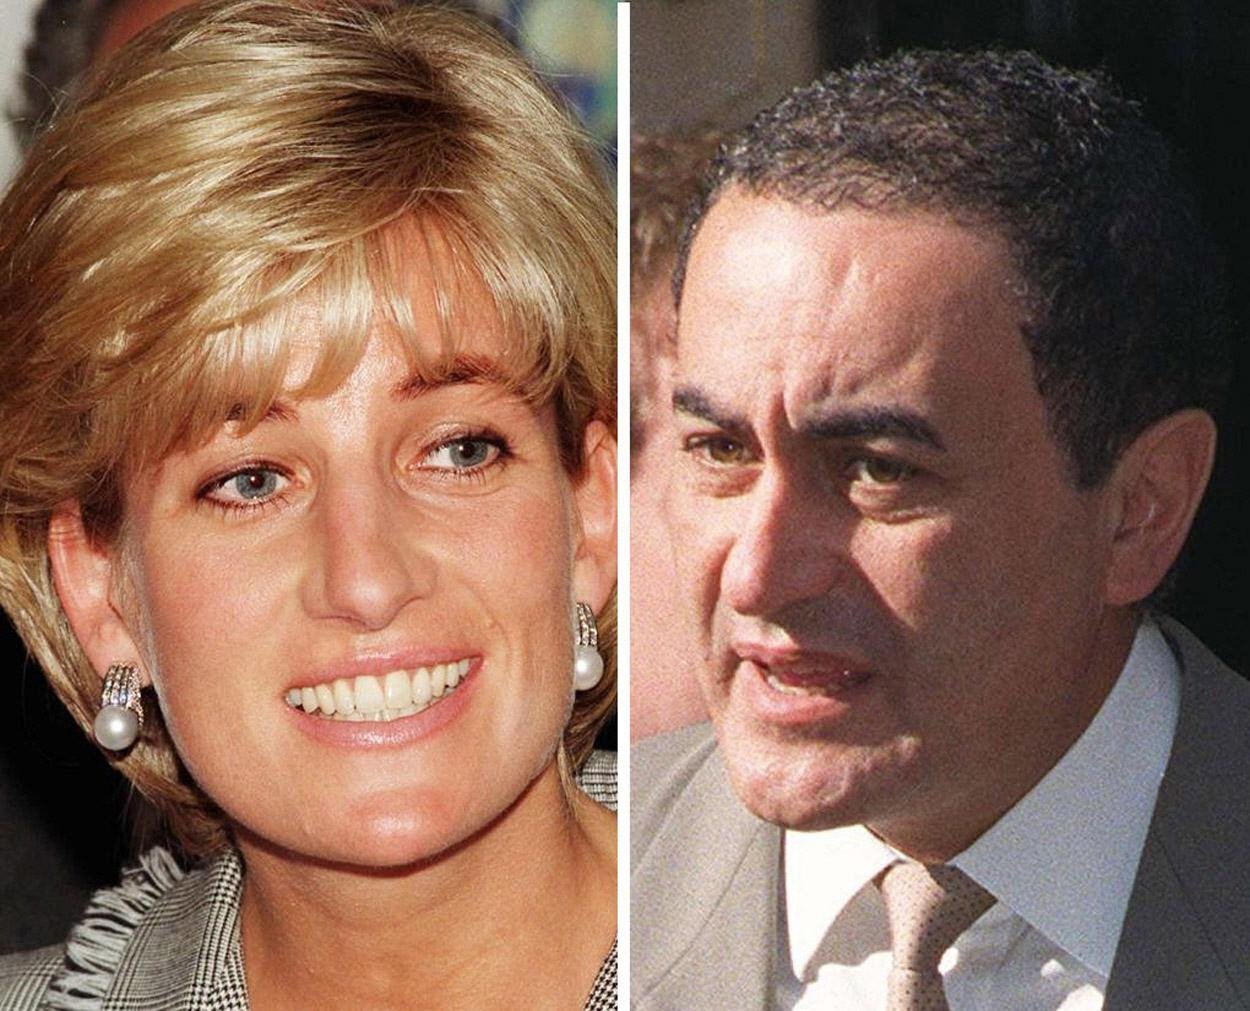 A side-by-side portrait of Diana Princess of Wales and Dodi Fayed dated June 1 2004. / Source: Getty Images